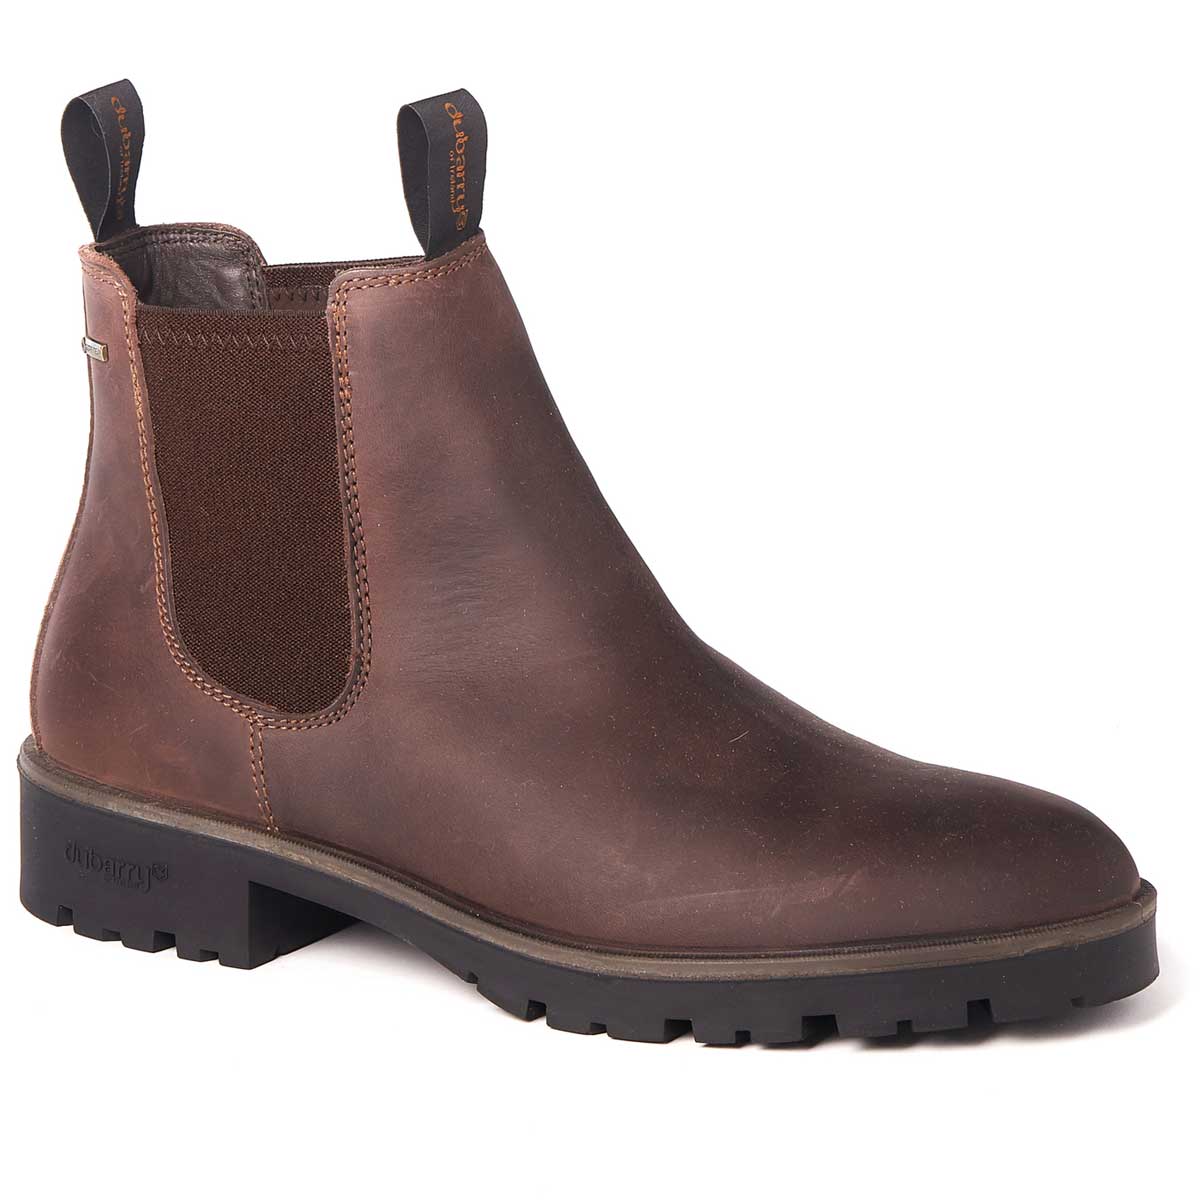 DUBARRY Antrim Chelsea Boots - Mens Gore-Tex Leather - Old Rum